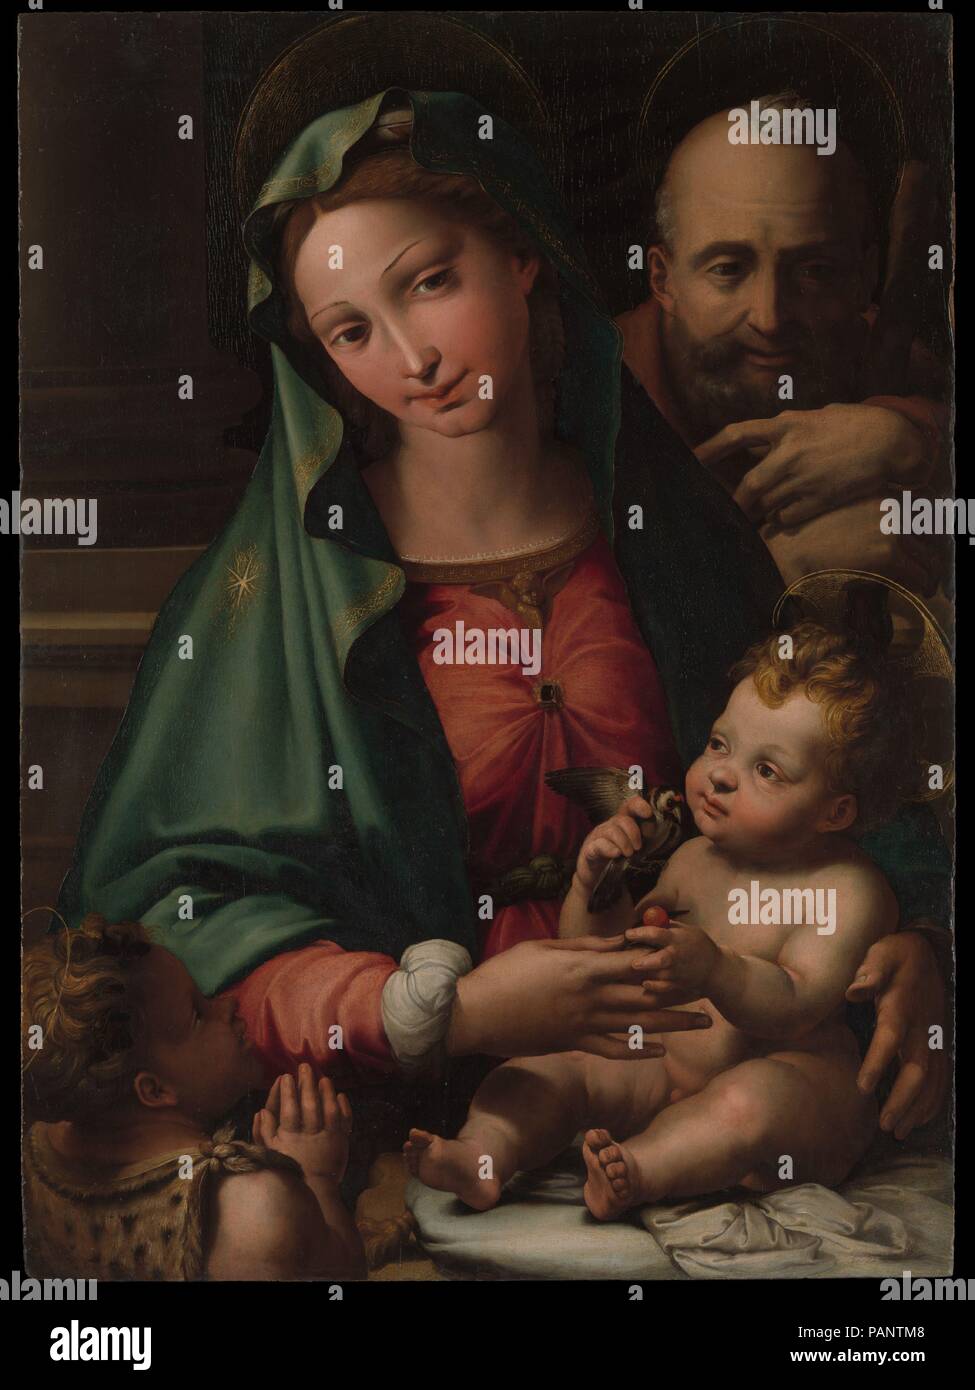 The Holy Family with the Infant Saint John the Baptist. Artist: Perino del Vaga (Pietro Buonaccorsi) (Italian, Florence 1501-1547 Rome). Dimensions: 34 3/4 x 25 5/8 in. (88.3 x 65.1 cm). Date: ca. 1524-26.    Florentine by birth, Perino was trained in Raphael's workshop in Rome, where he soon became one of the most inventive artists of his generation. This is a rare devotional painting by him. It includes traditional symbols such as the goldfinch (symbolic of the Resurrection), but also more unusual details, especially a young Saint John who is crowned with grape leaves and wears a leopard ski Stock Photo